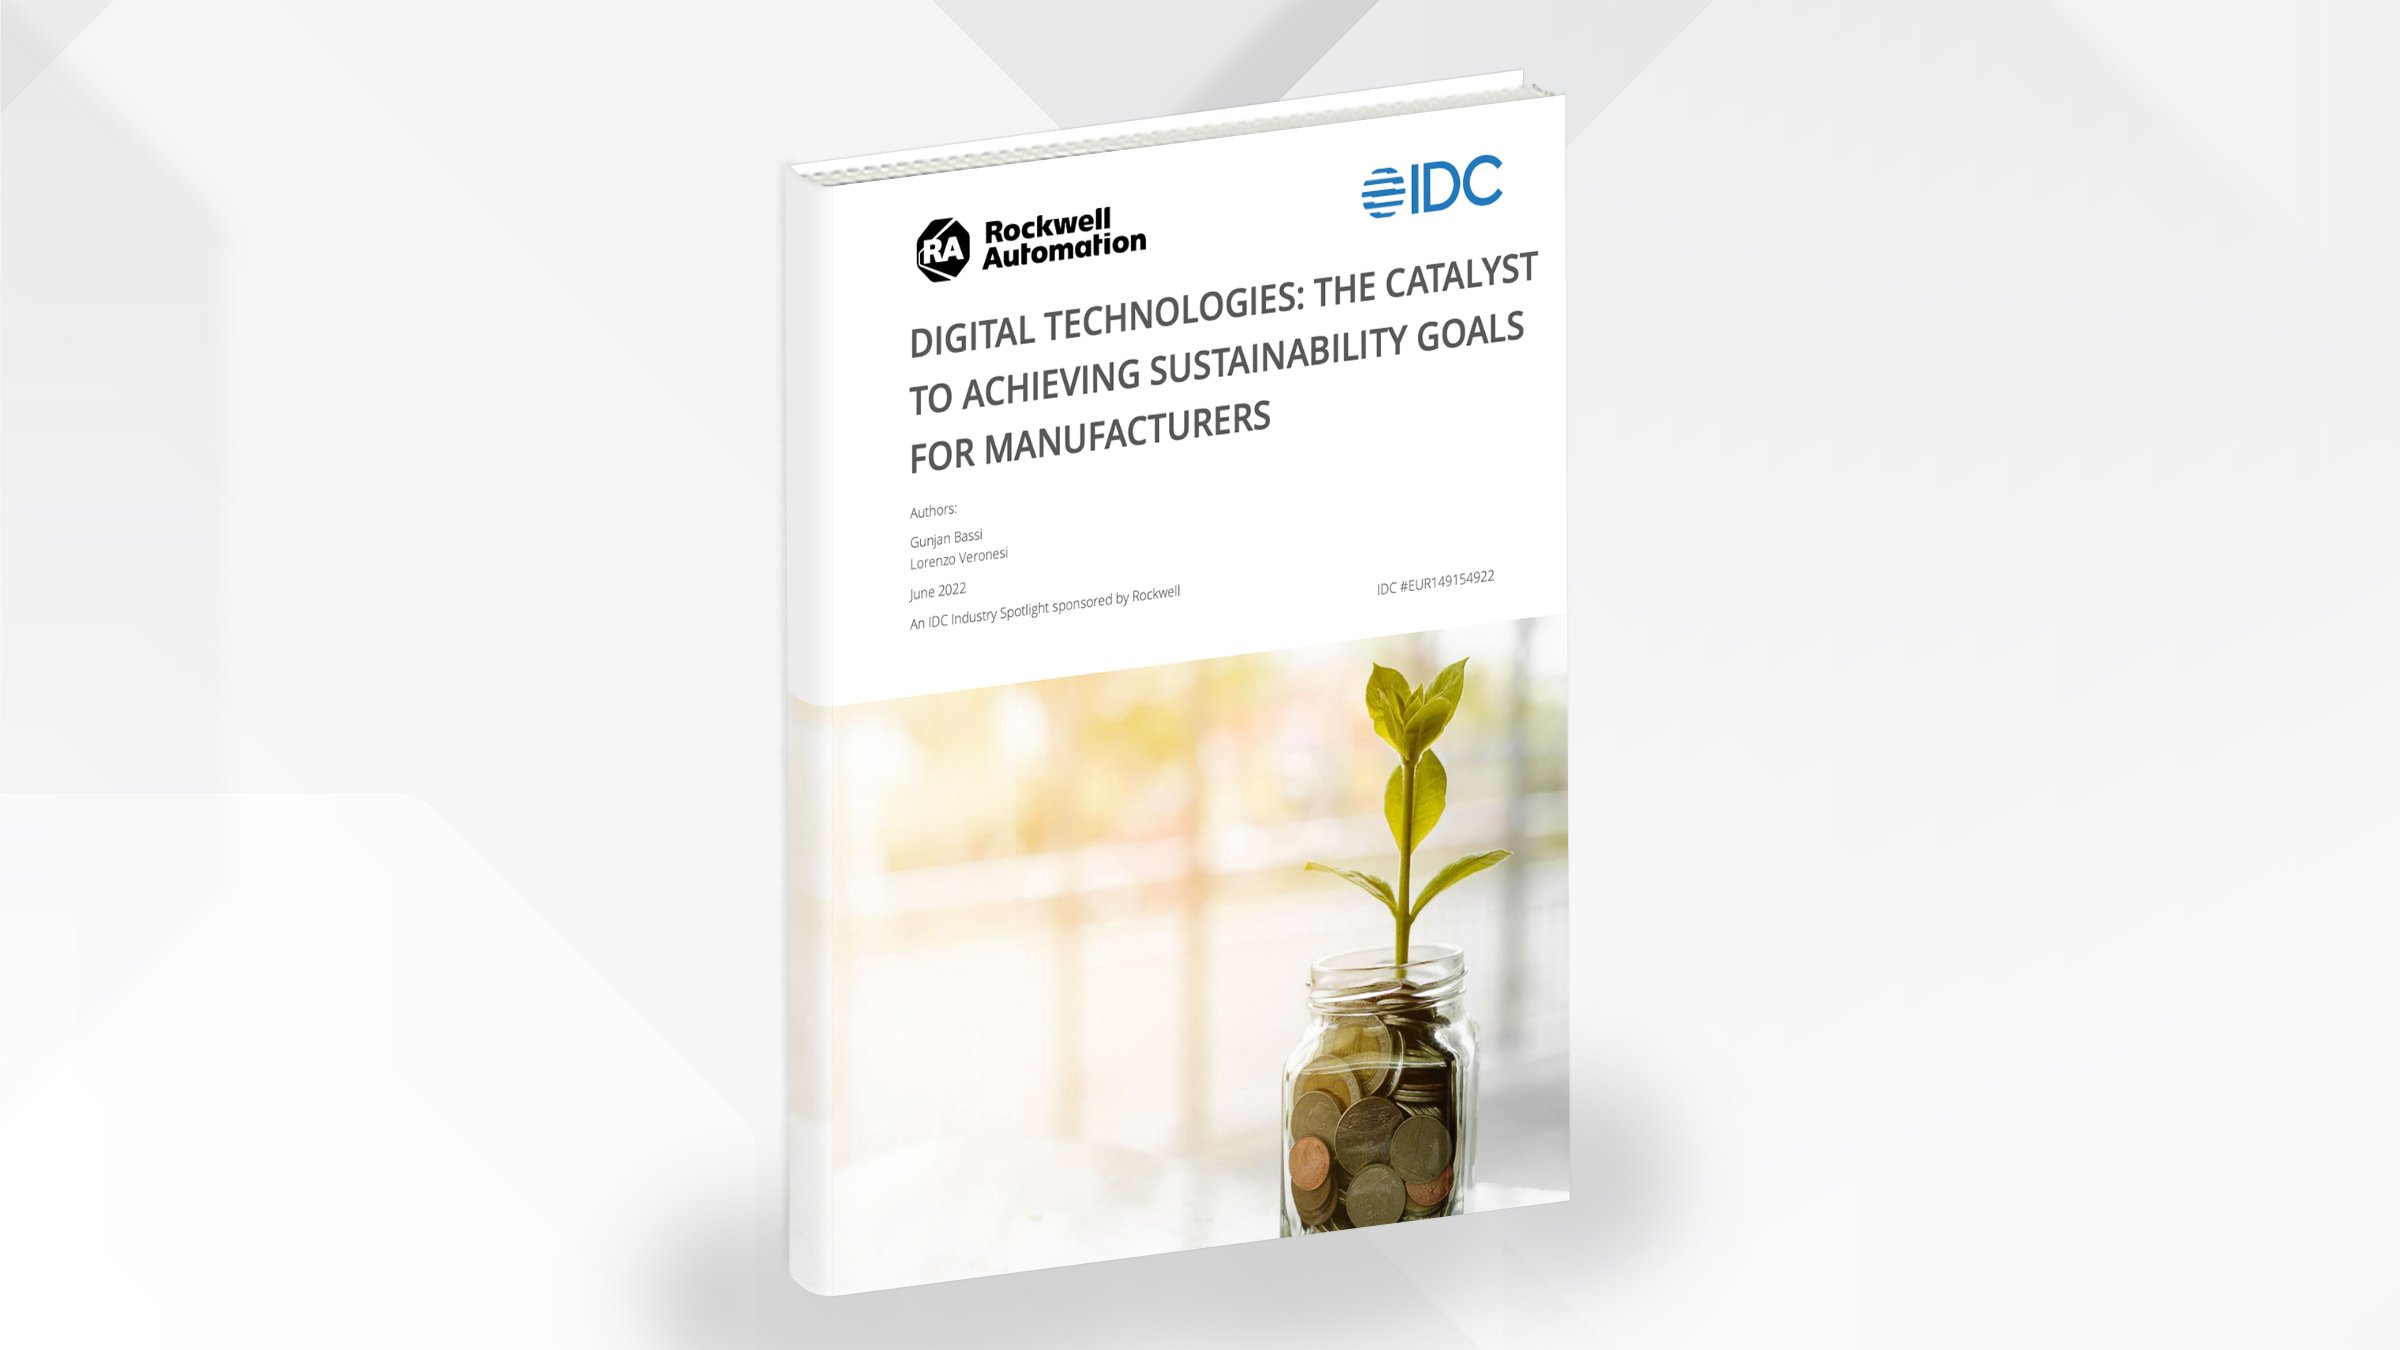 Digital Technologies: The Catalyst To Achieving Sustainability Goals For Manufacturers IDC eBook